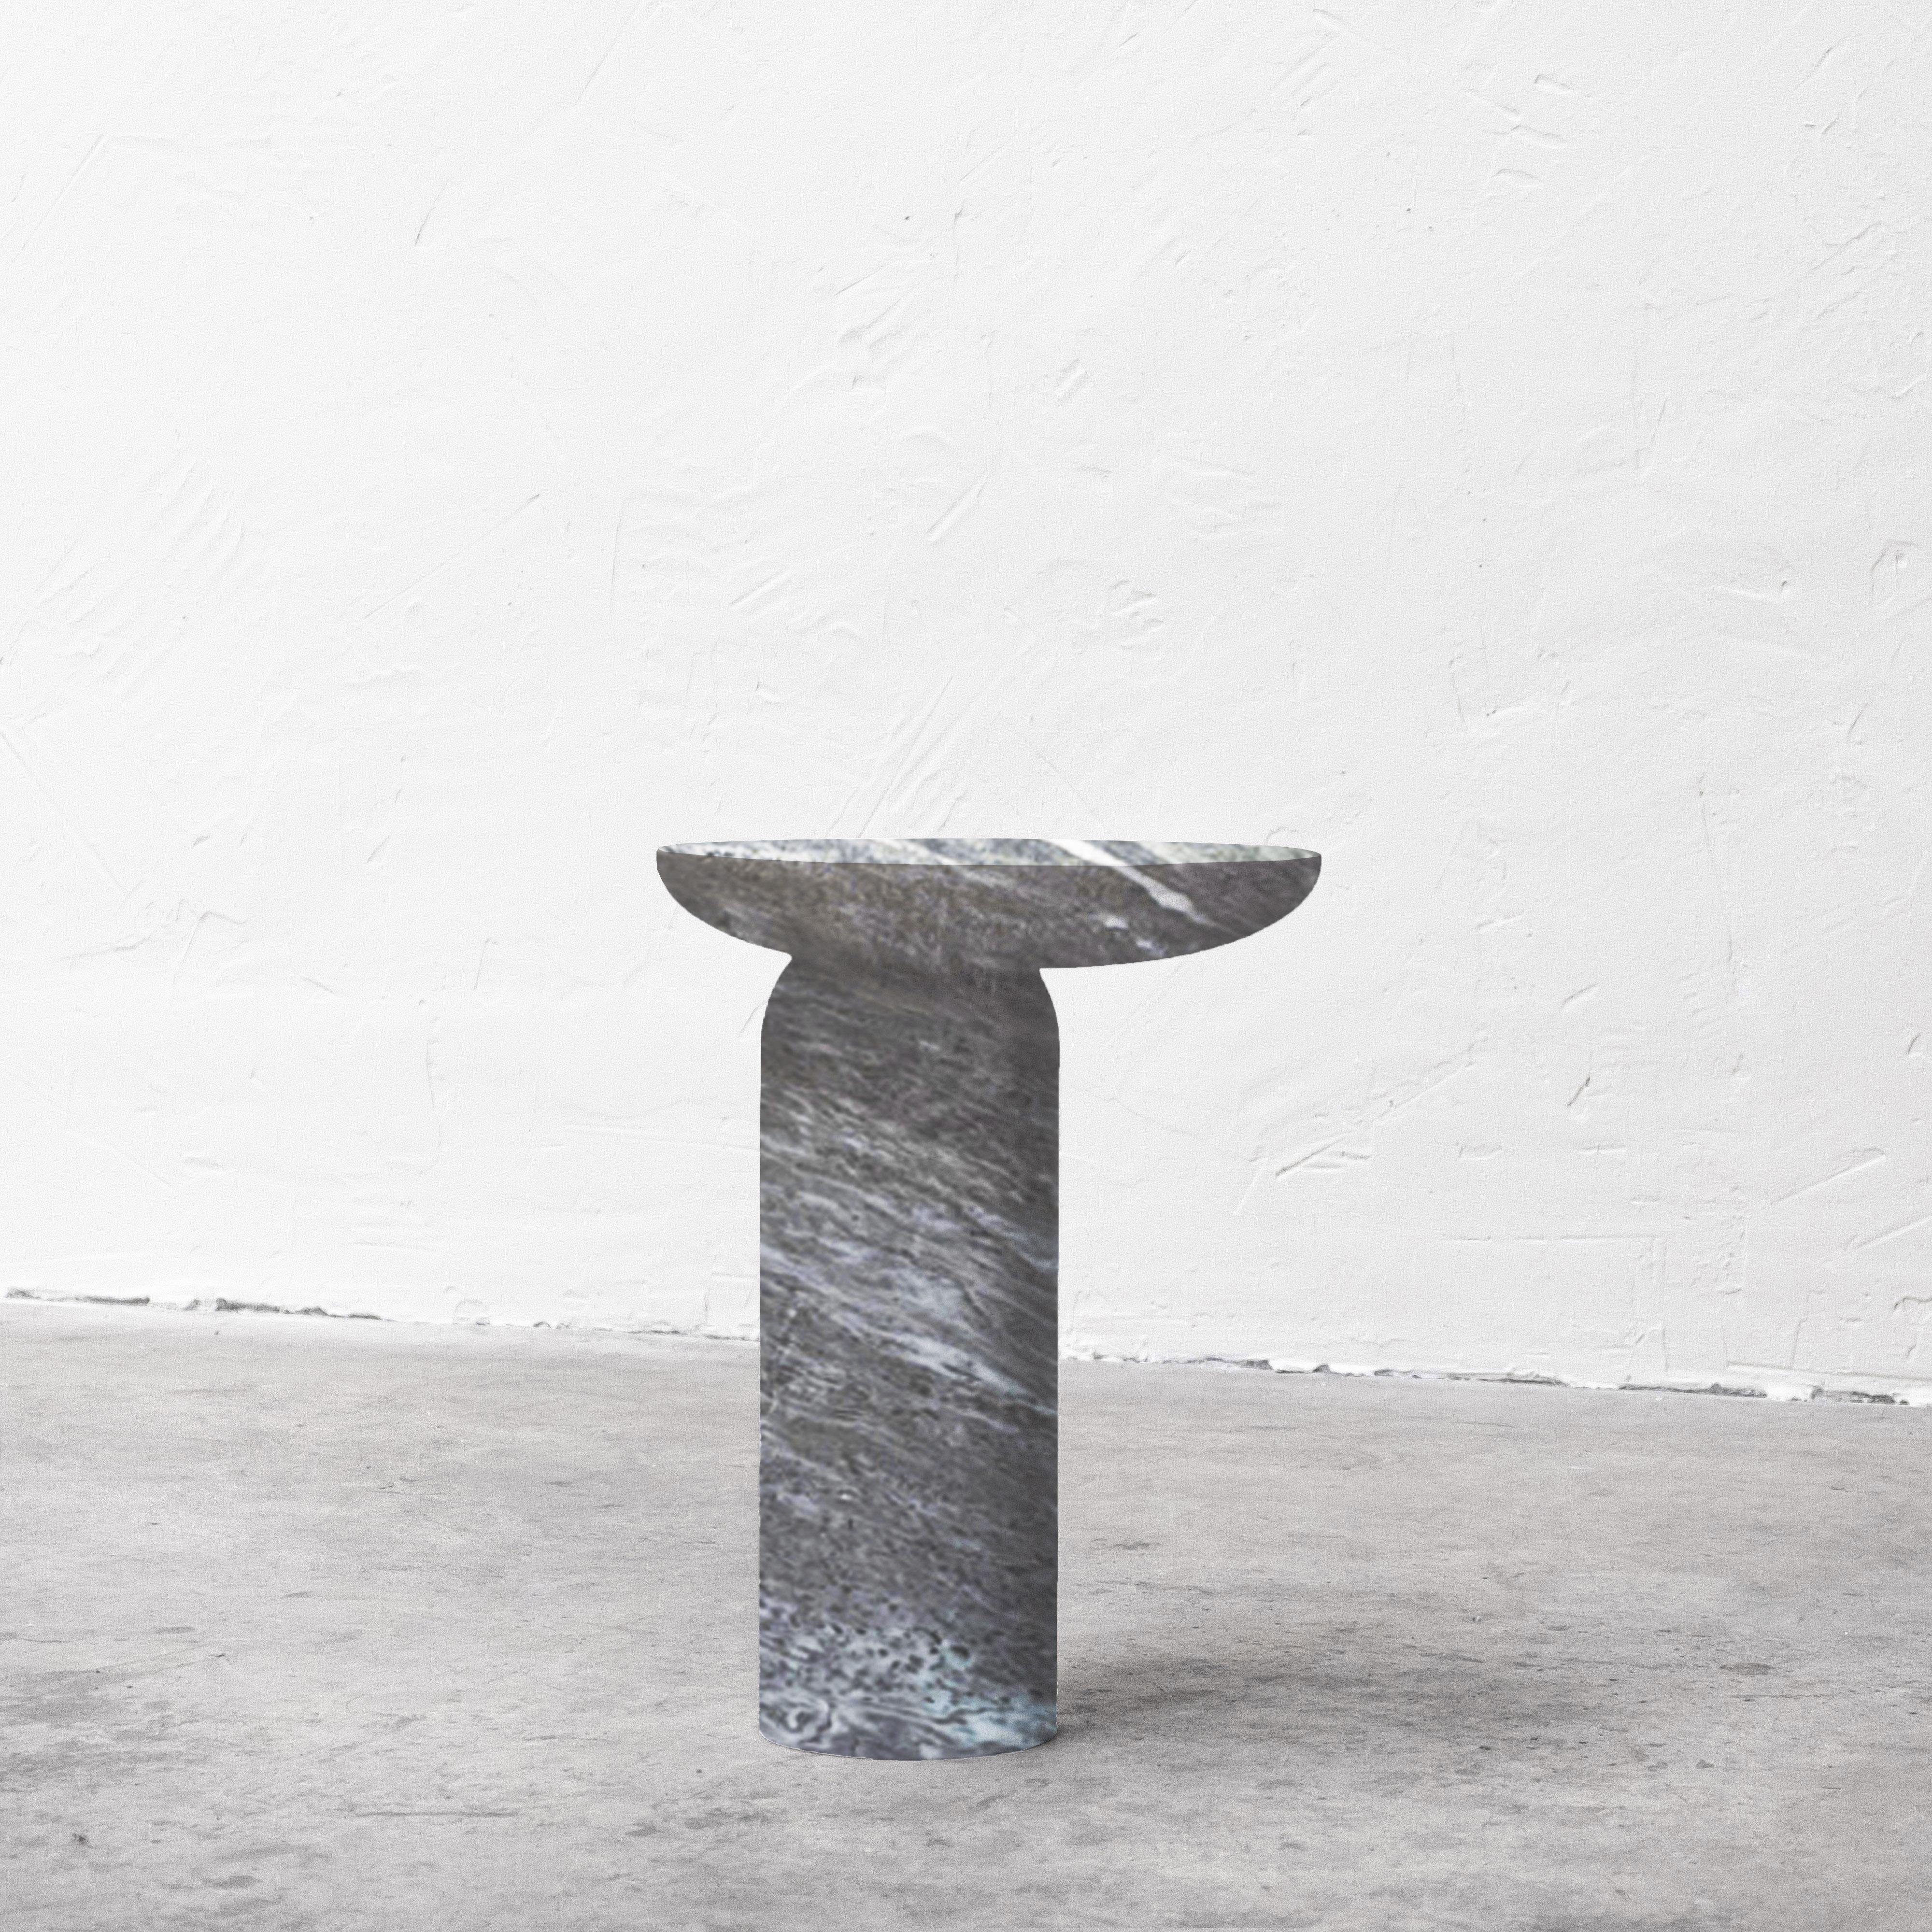 Decomplexe, Marble Side Table Sculpted by Frederic Saulou
Limited Edition
Materials: Ruivina Marble
Dimensions: H 50 x D 38 cm. 
 
